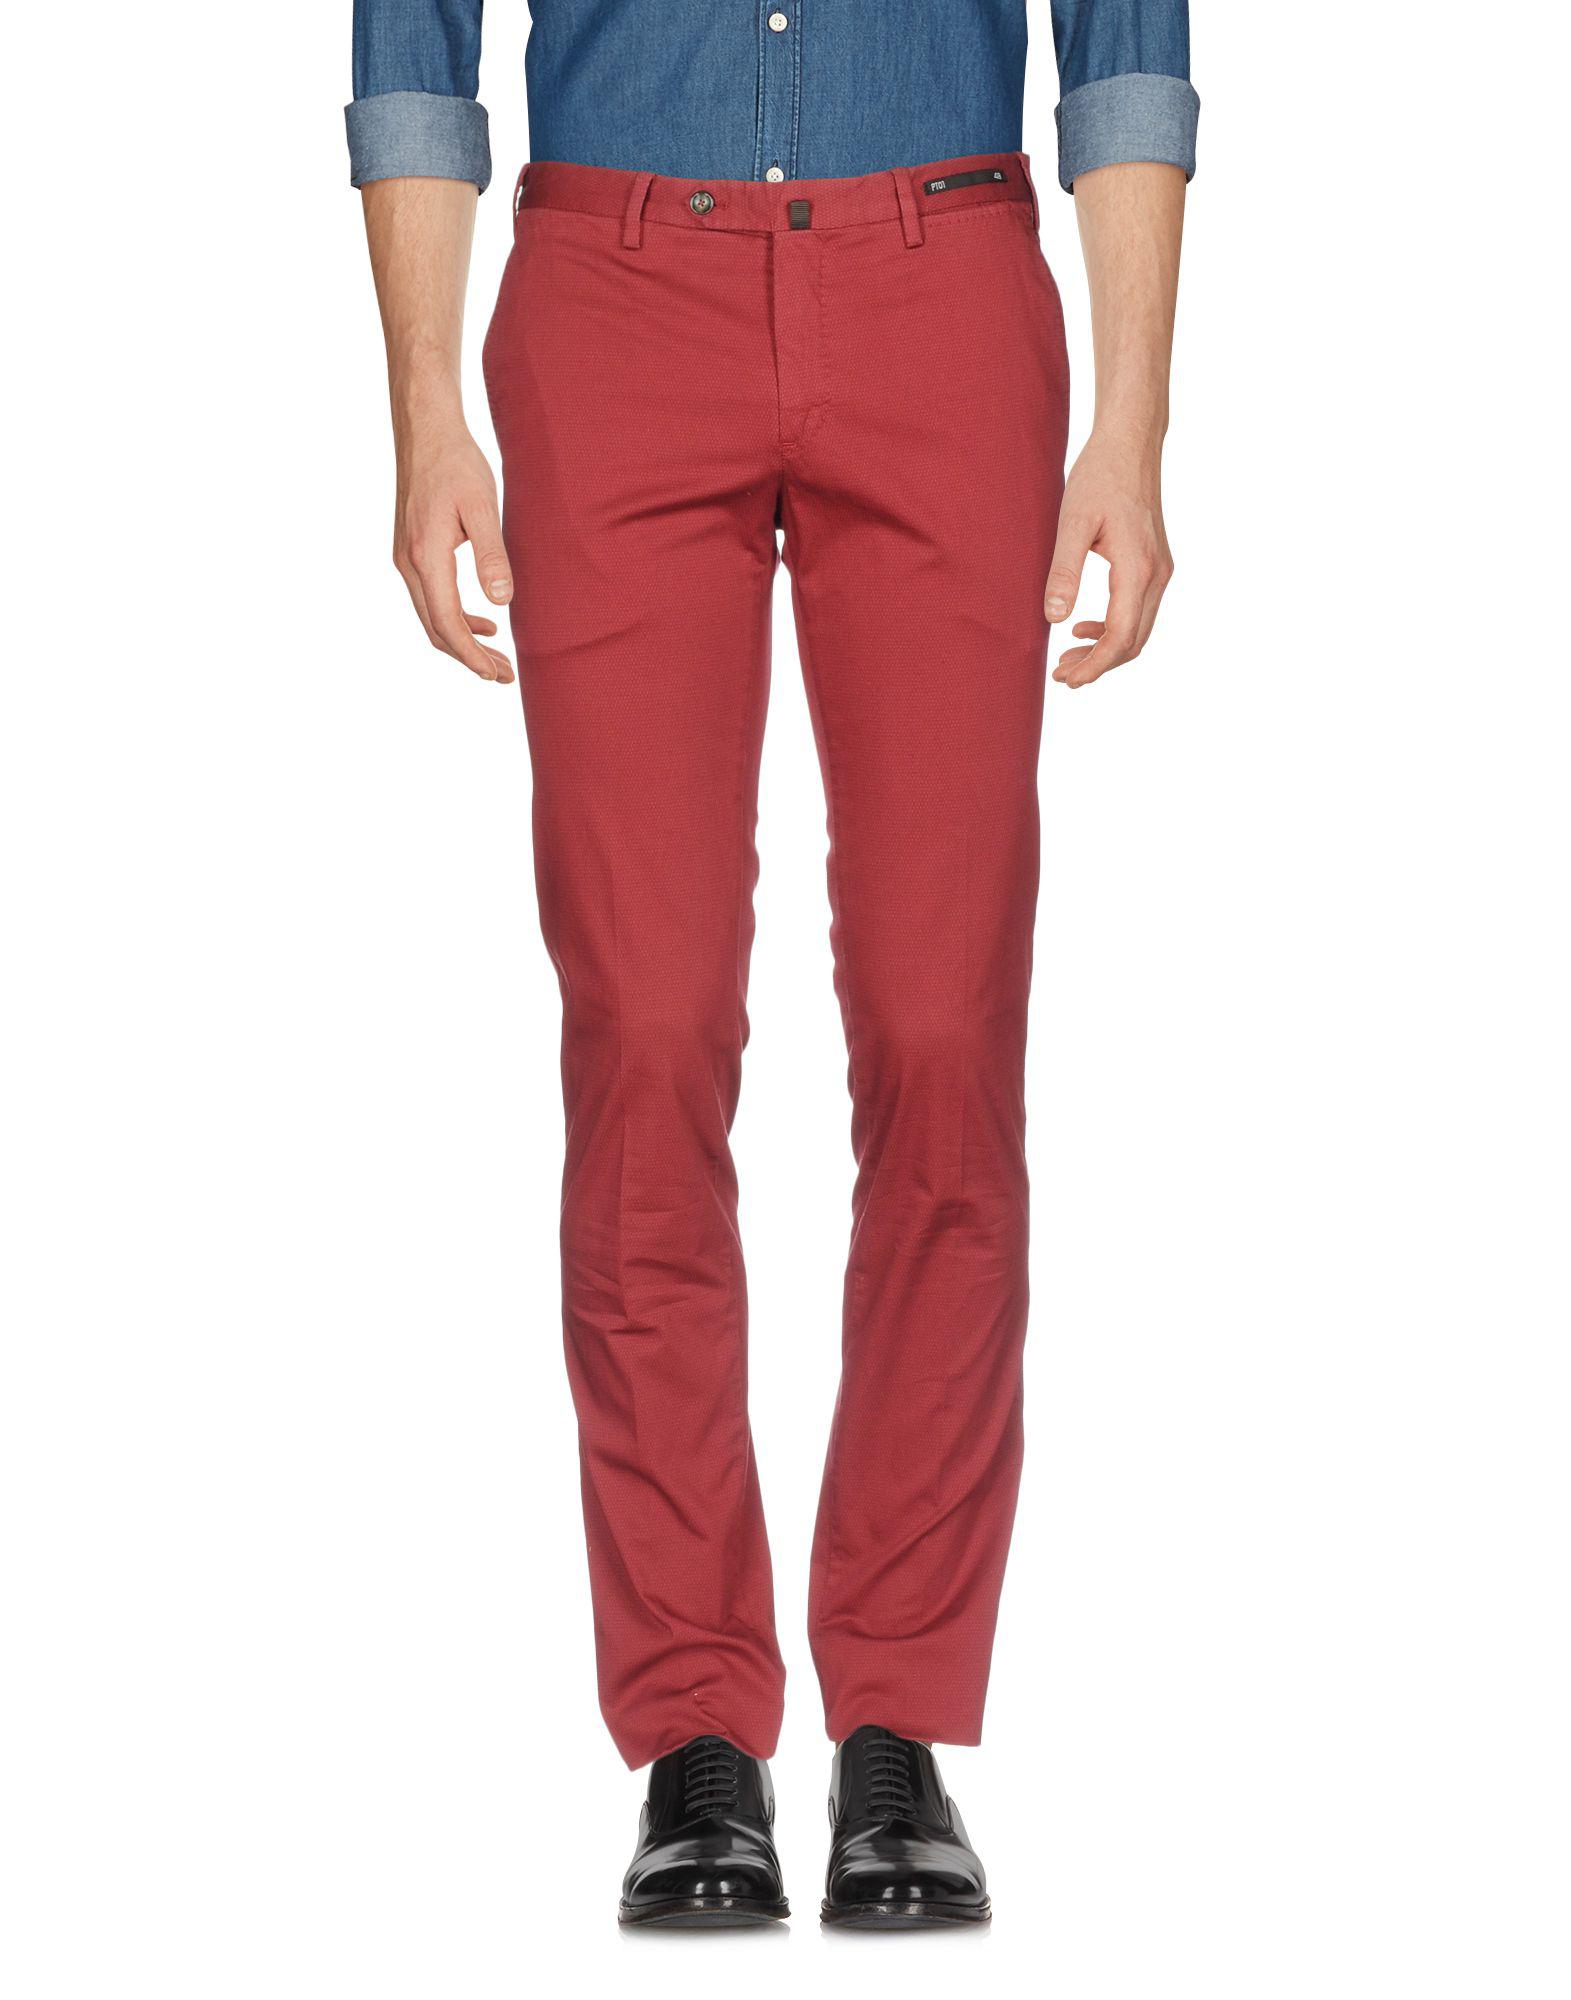 PT01 Casual Pants in Maroon (Red) for Men - Save 88% - Lyst